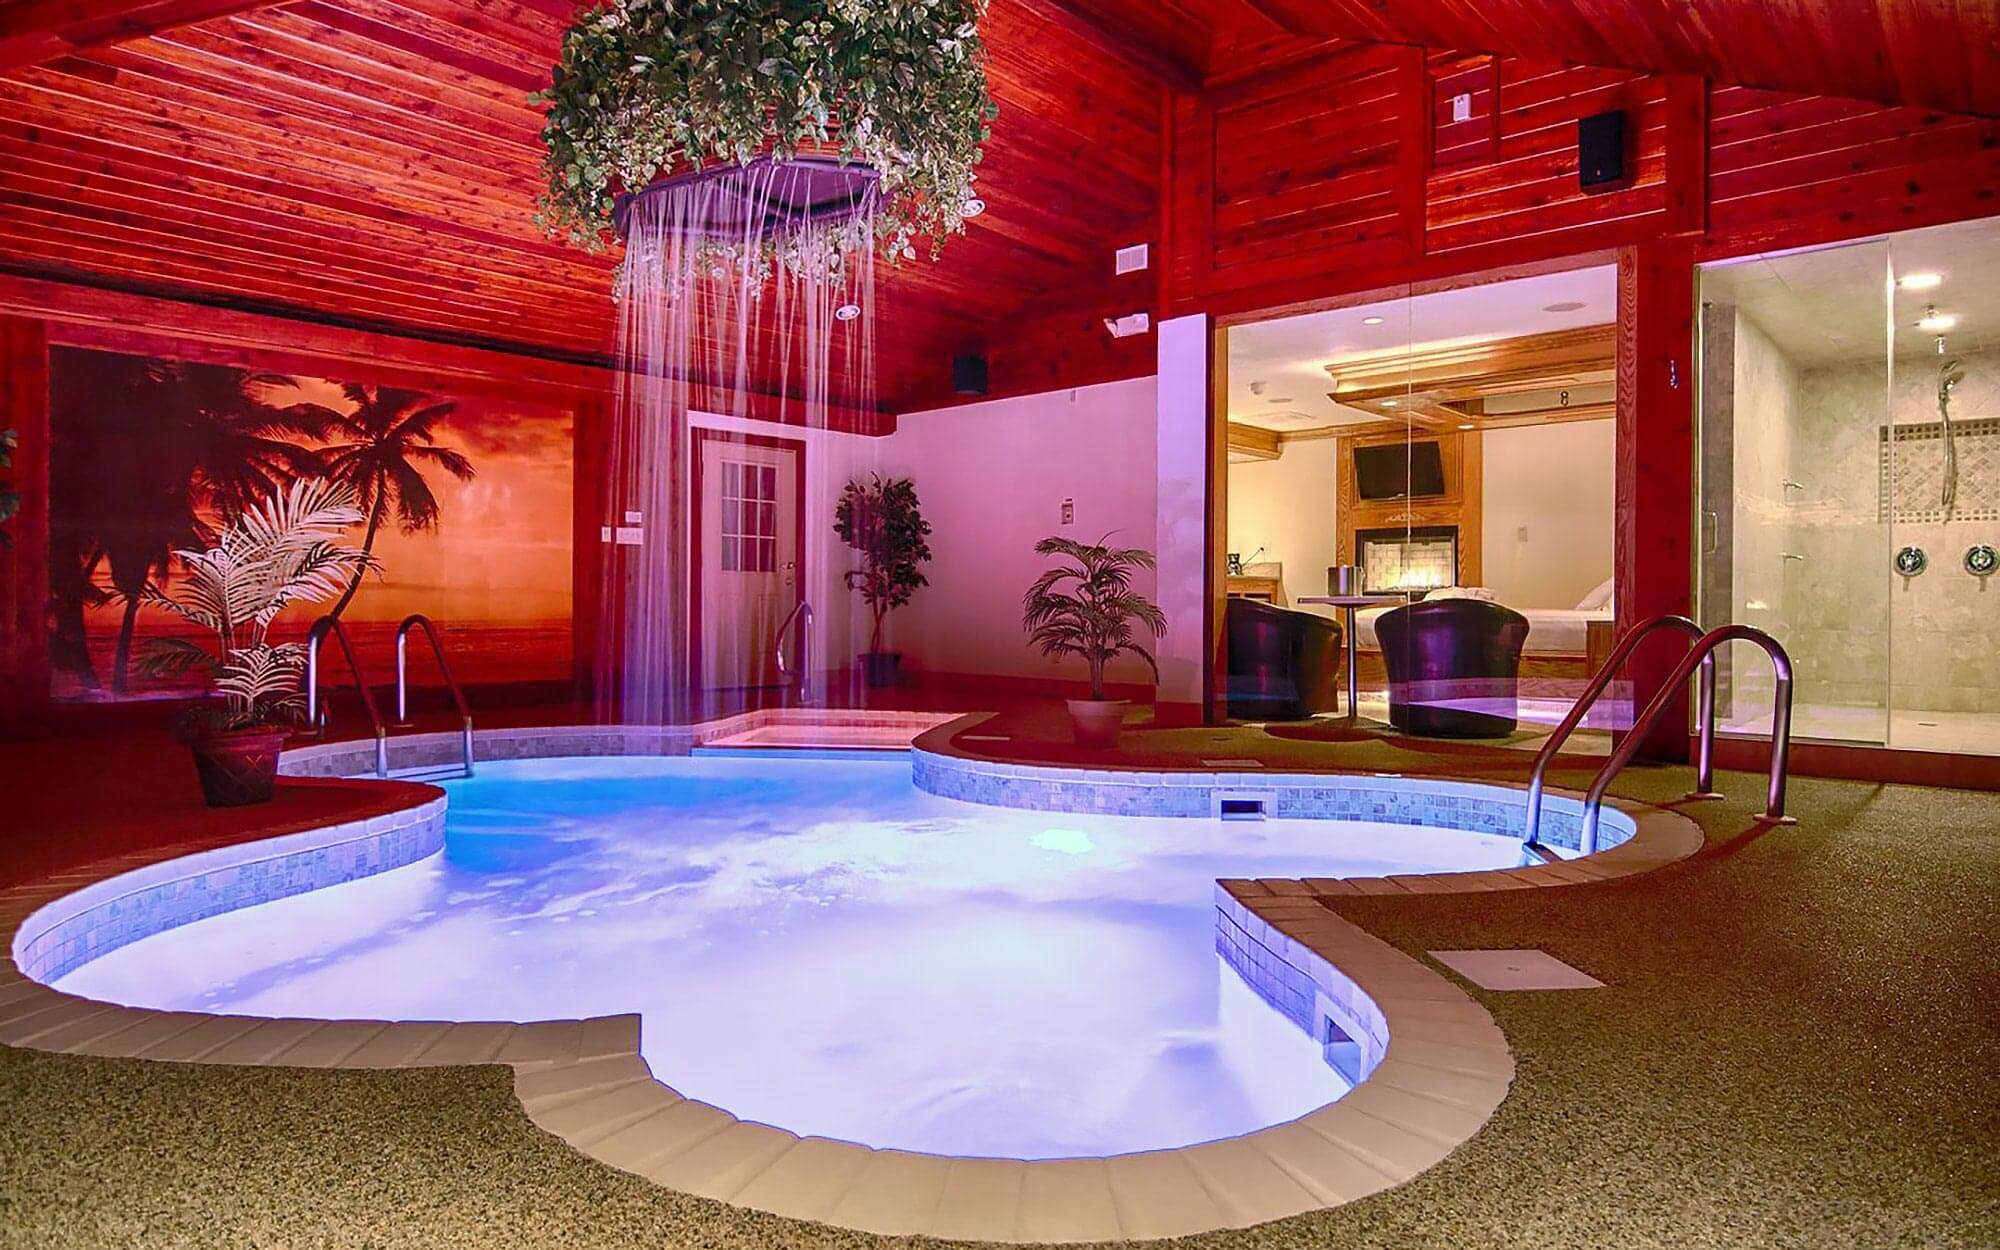 PARADISE SWIMMING POOL SUITE - Learn more...